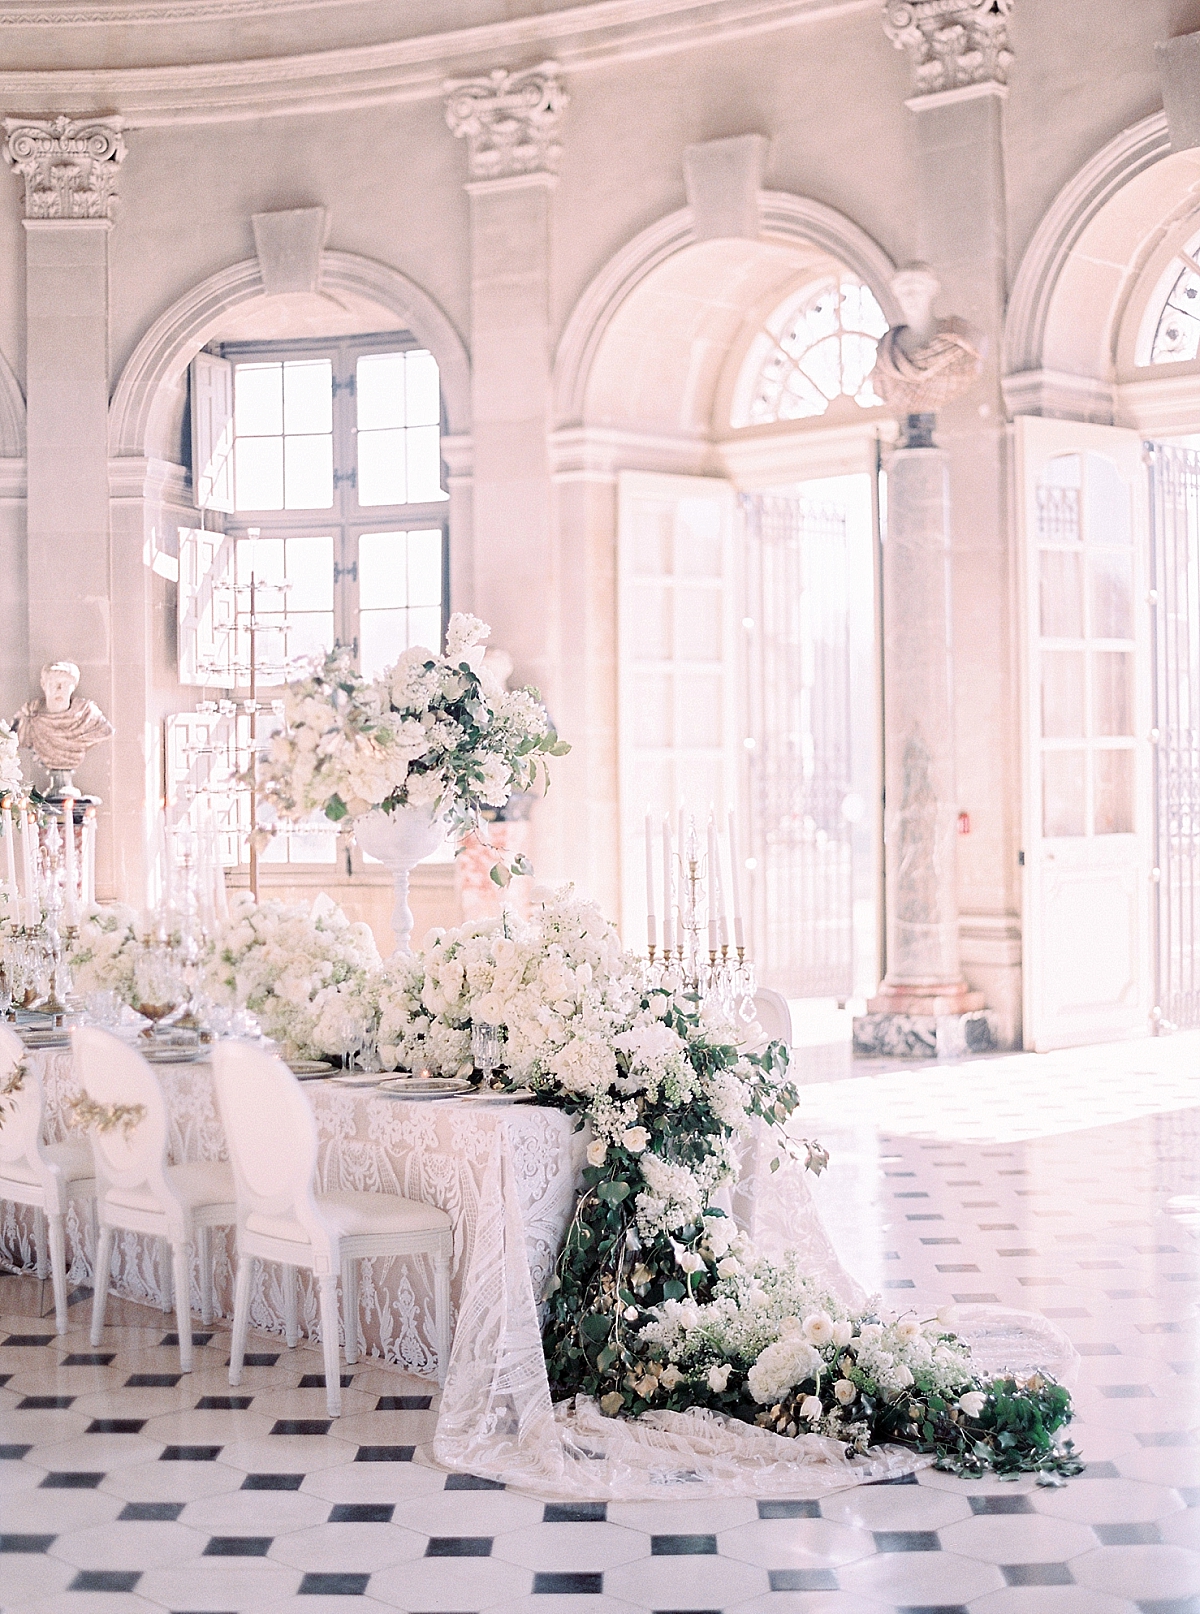 Wedding table in the ceremony room of the Chateau de Vaux le Vicomte 